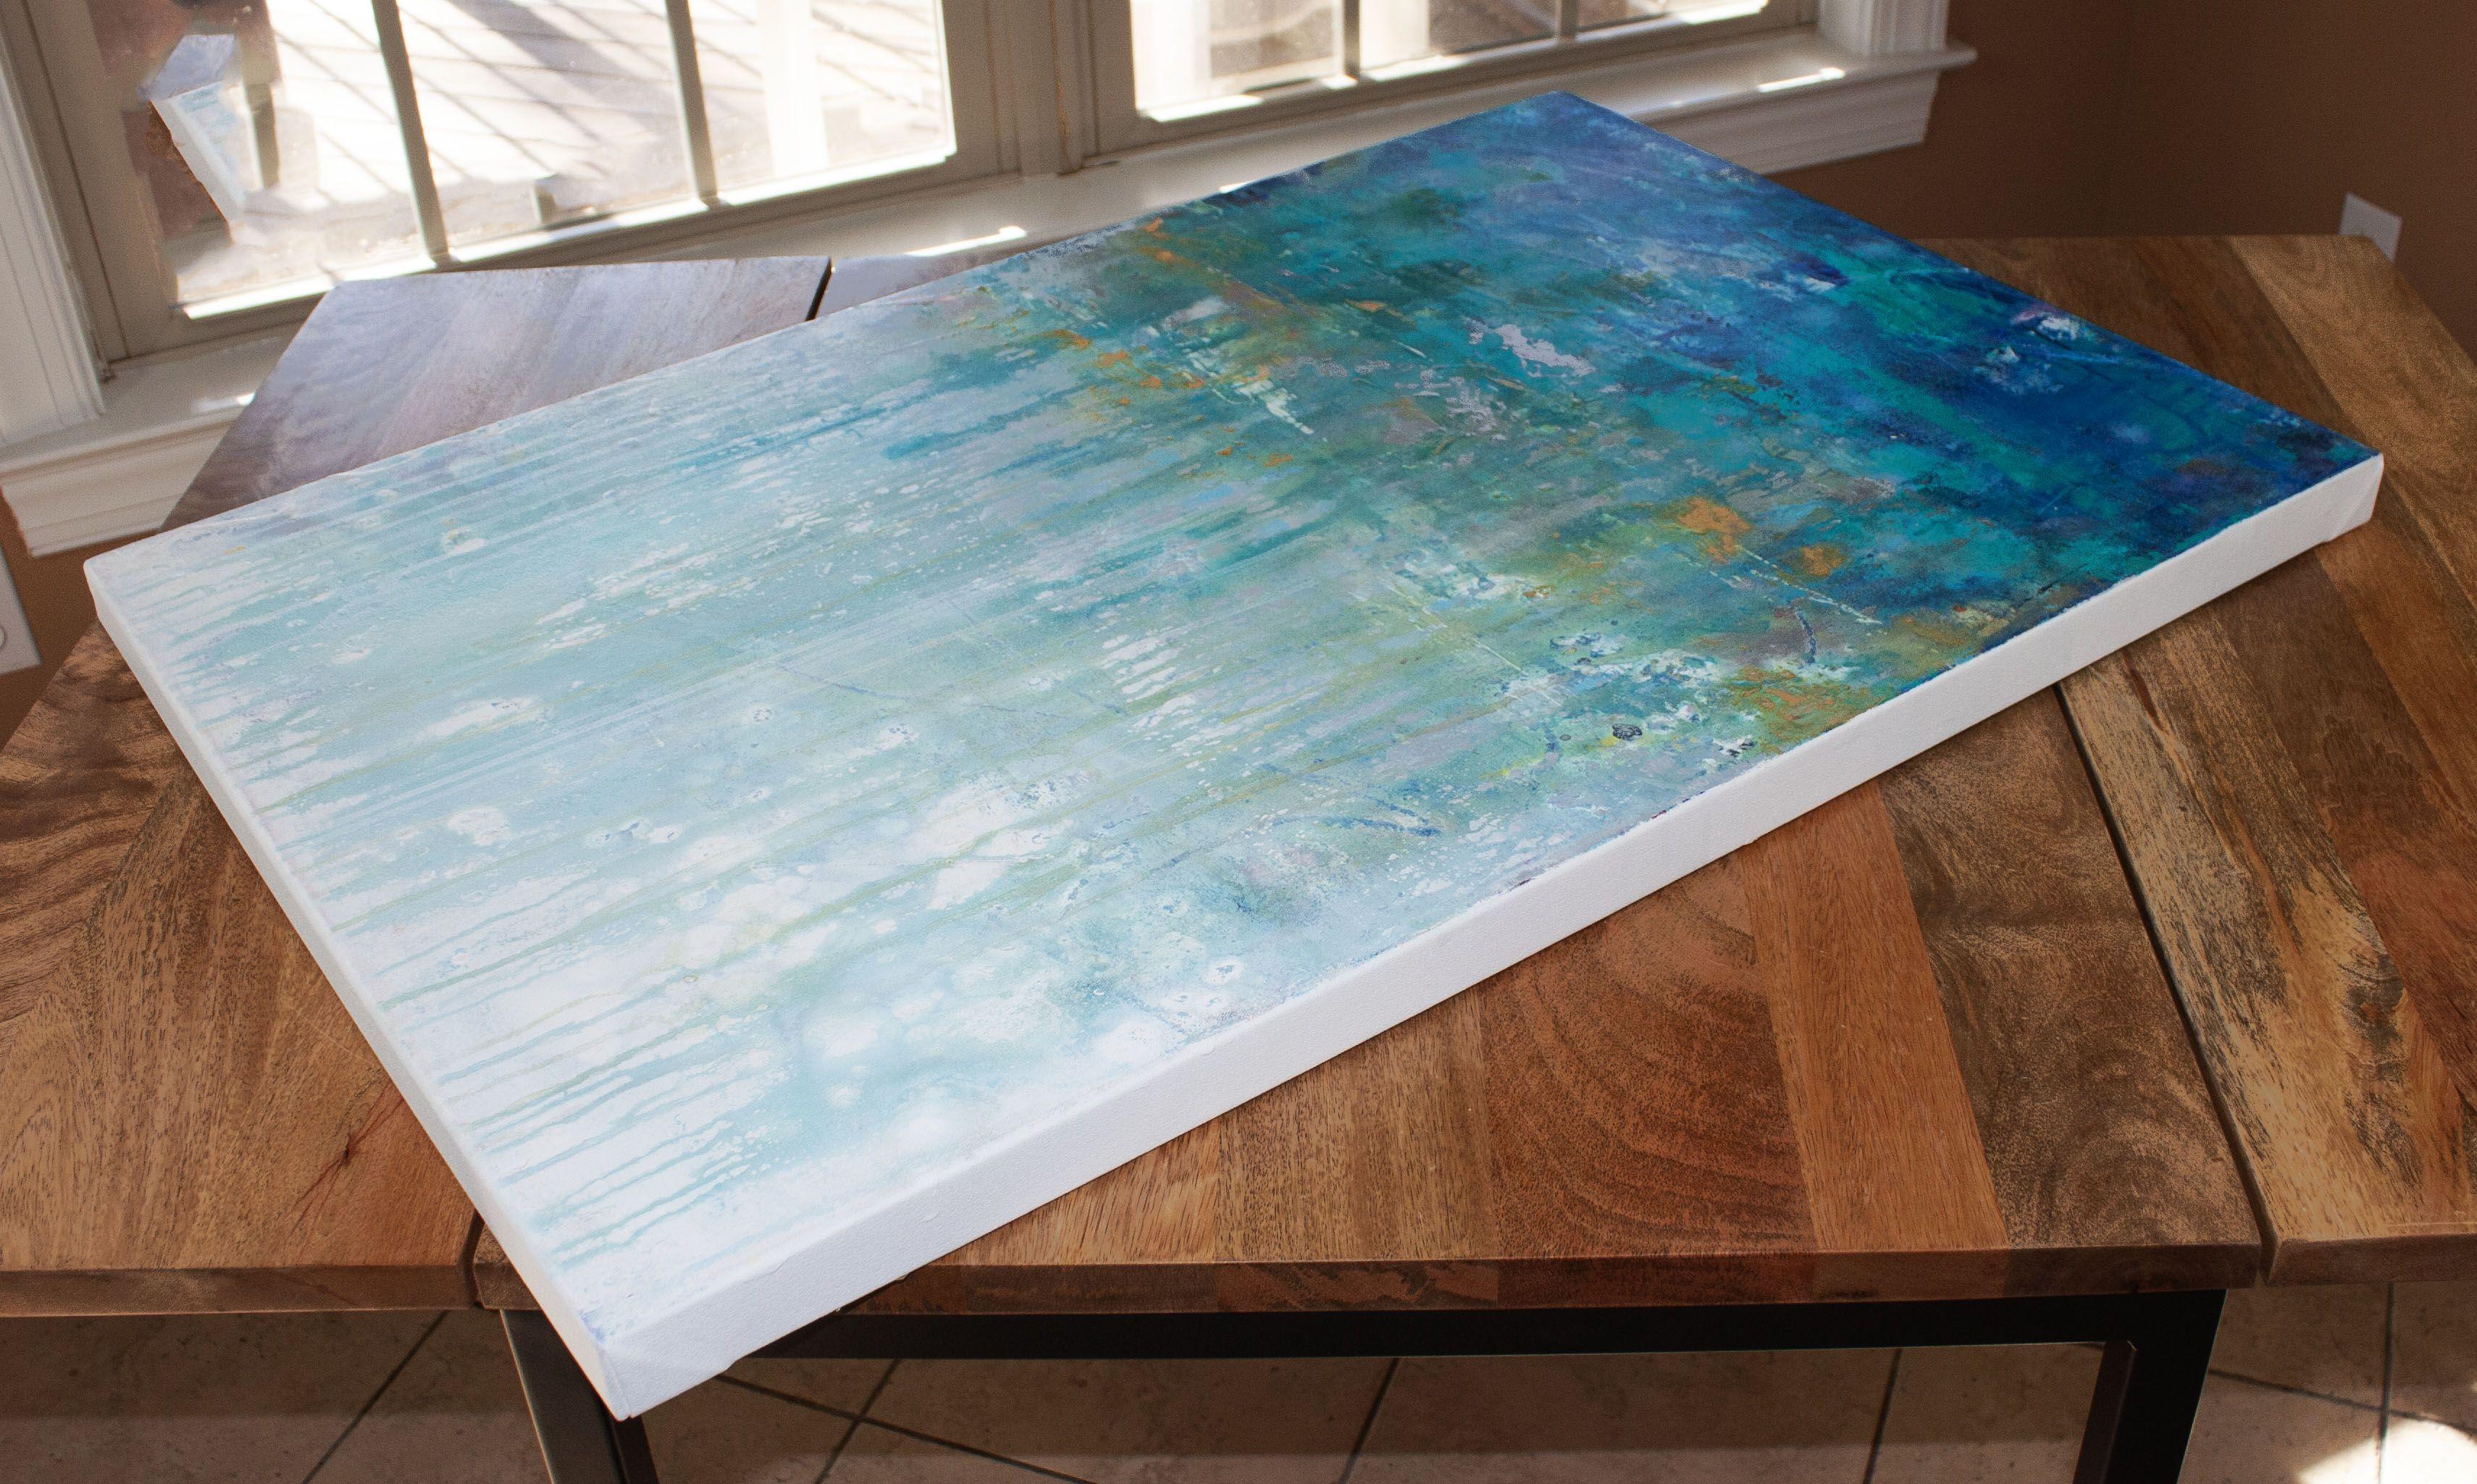 Asthenosphere 9 is an original painting, created with acrylic paint on gallery-wrapped canvas. It has a width of 36 inches and a height of 24 inches with a depth of 1.5 inches (36x24x1.5). The colors used in the painting are white, blue, teal, red,